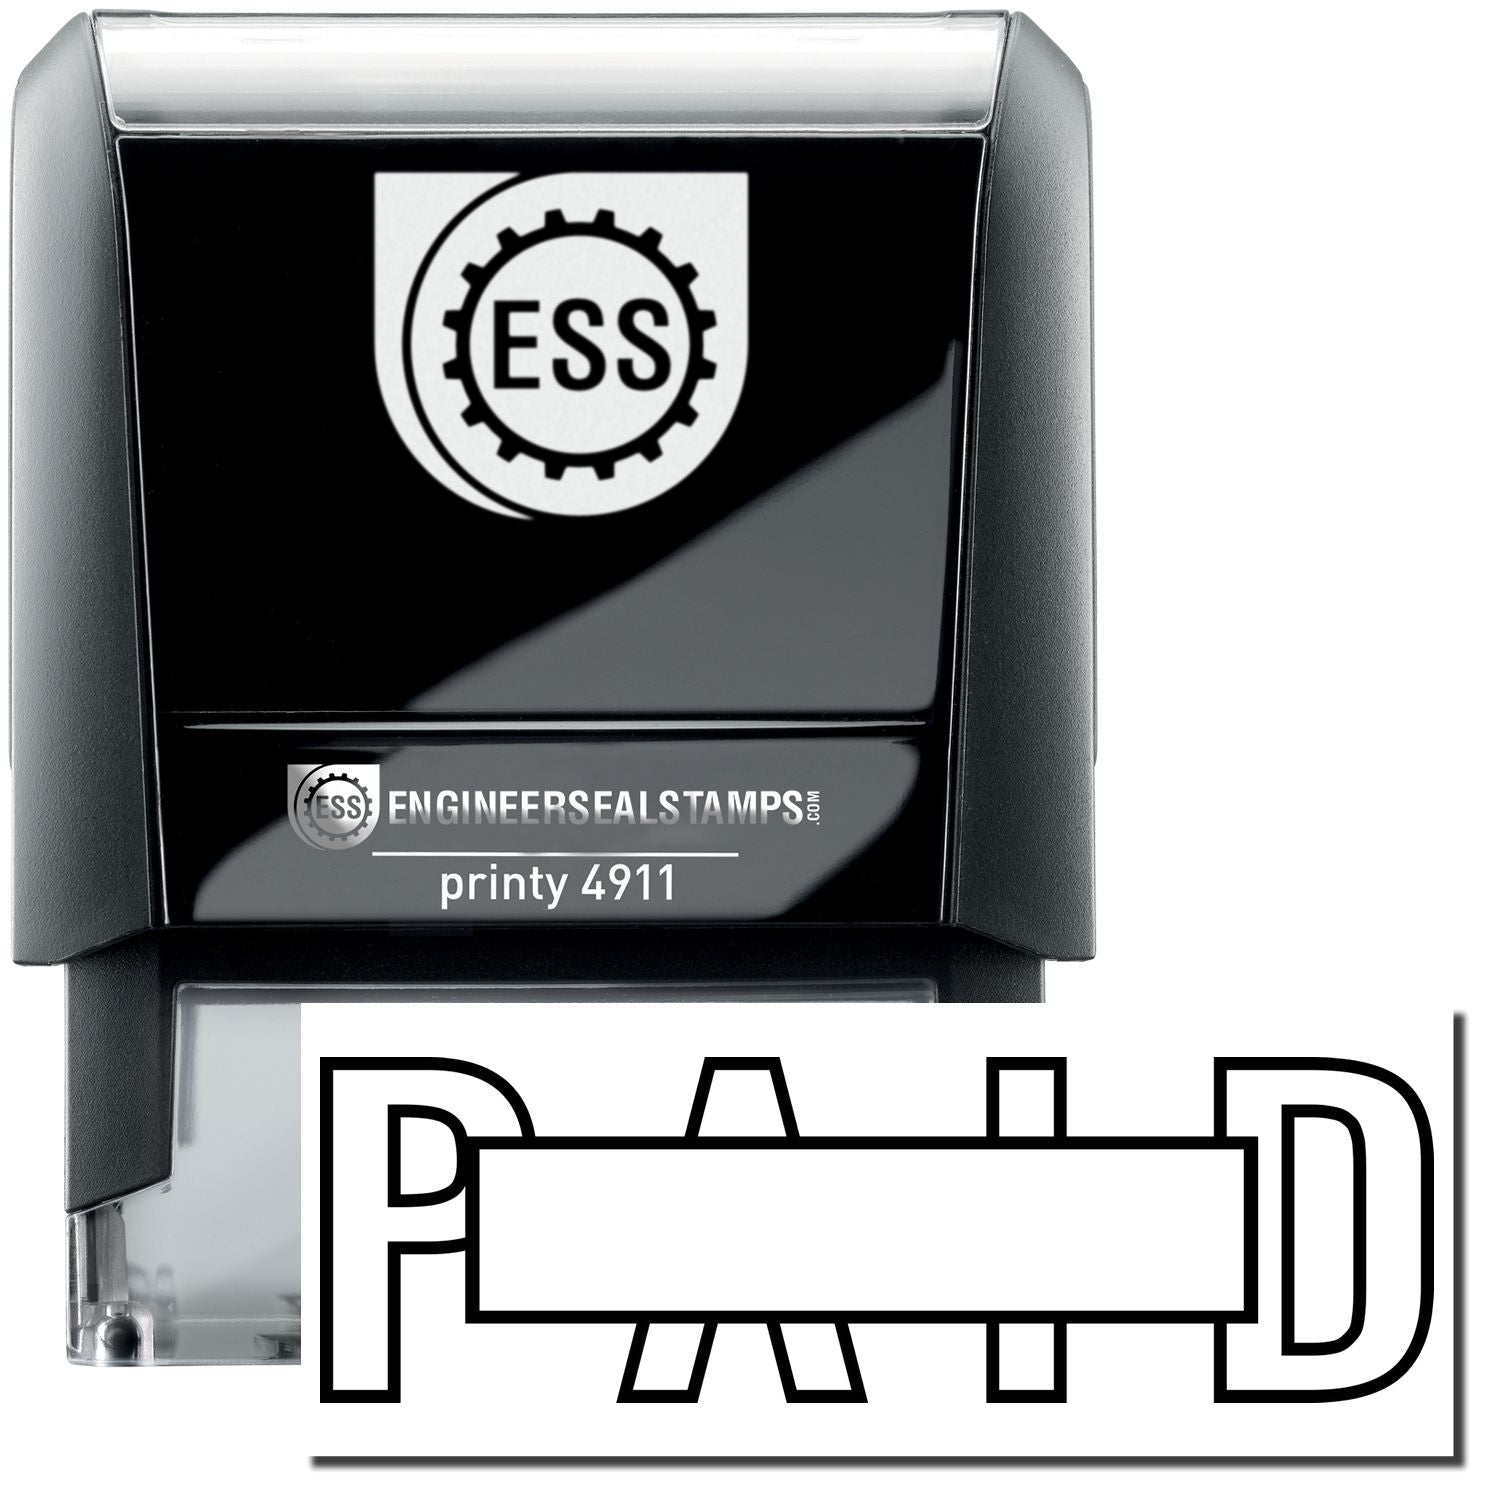 A self-inking stamp with a stamped image showing how the text "PAID" in an outline style with a box over the text's top is displayed after stamping.